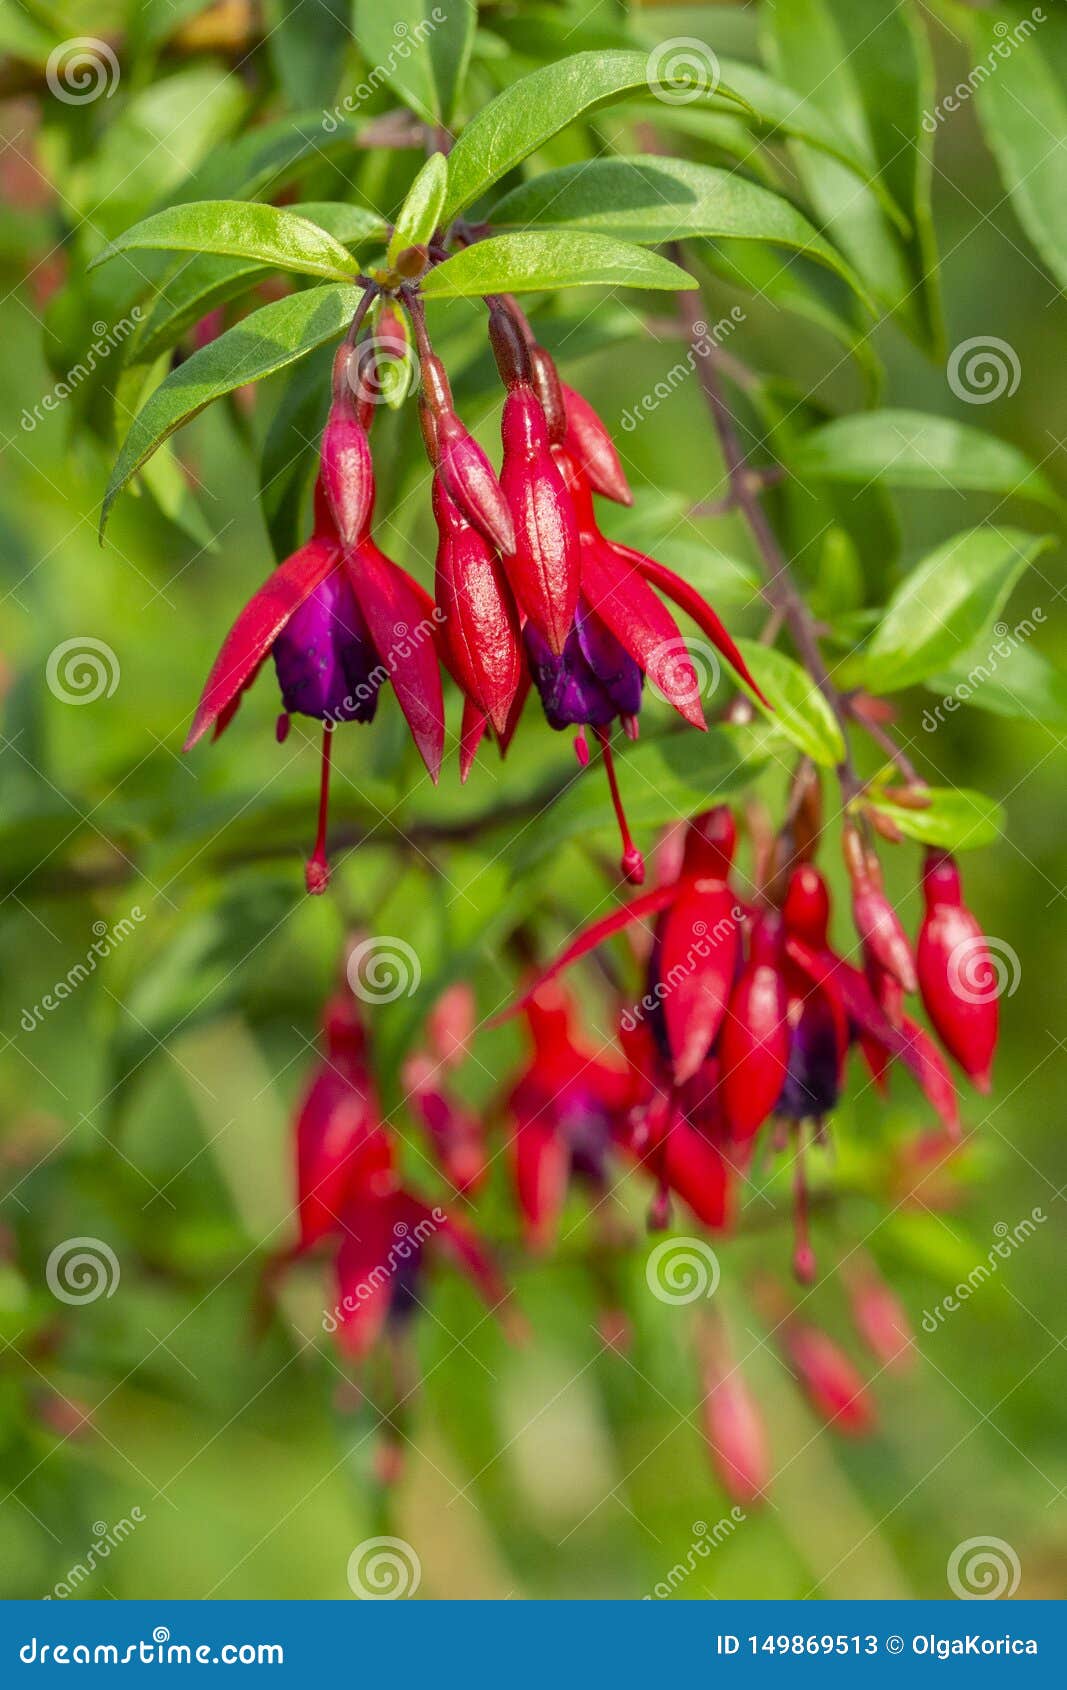 fuchsia blooming family onagraceae, evergreen ornamental plant. red flowers bells with lilac petals inside. beautiful